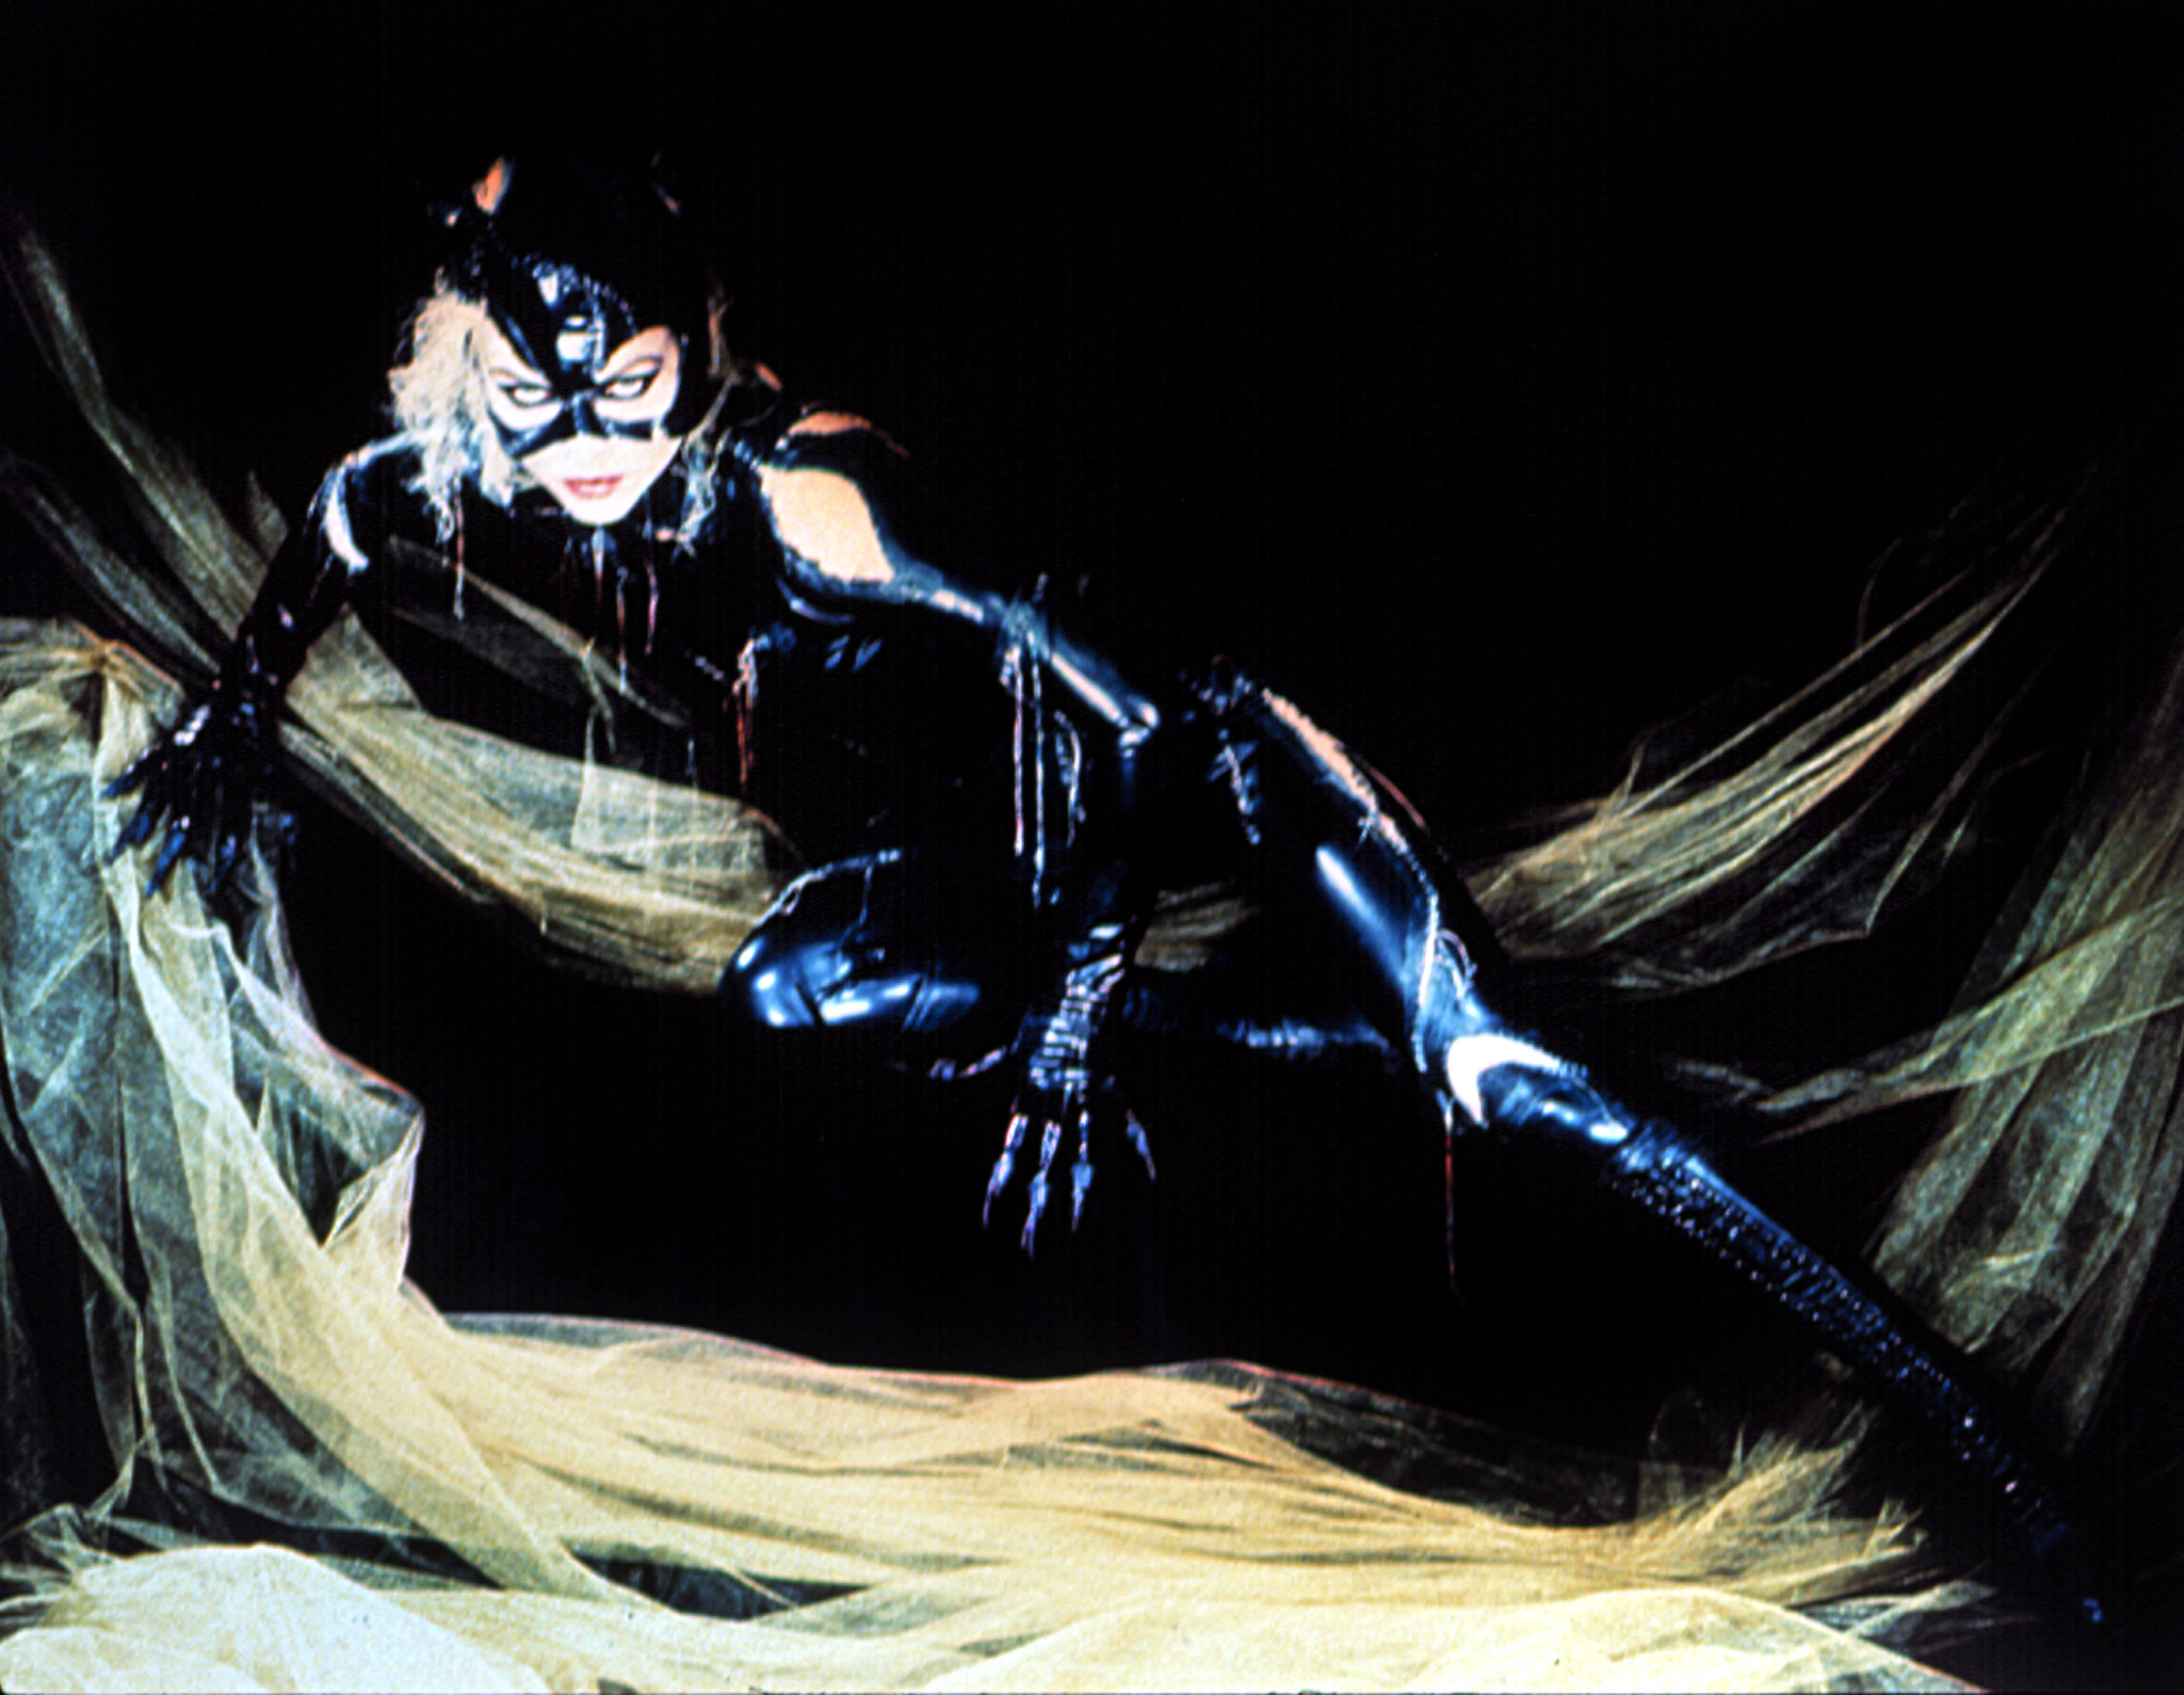 Catwoman character portrayed by Michelle Pfeiffer in a vinyl costume with a whip, posed dynamically against a dark backdrop